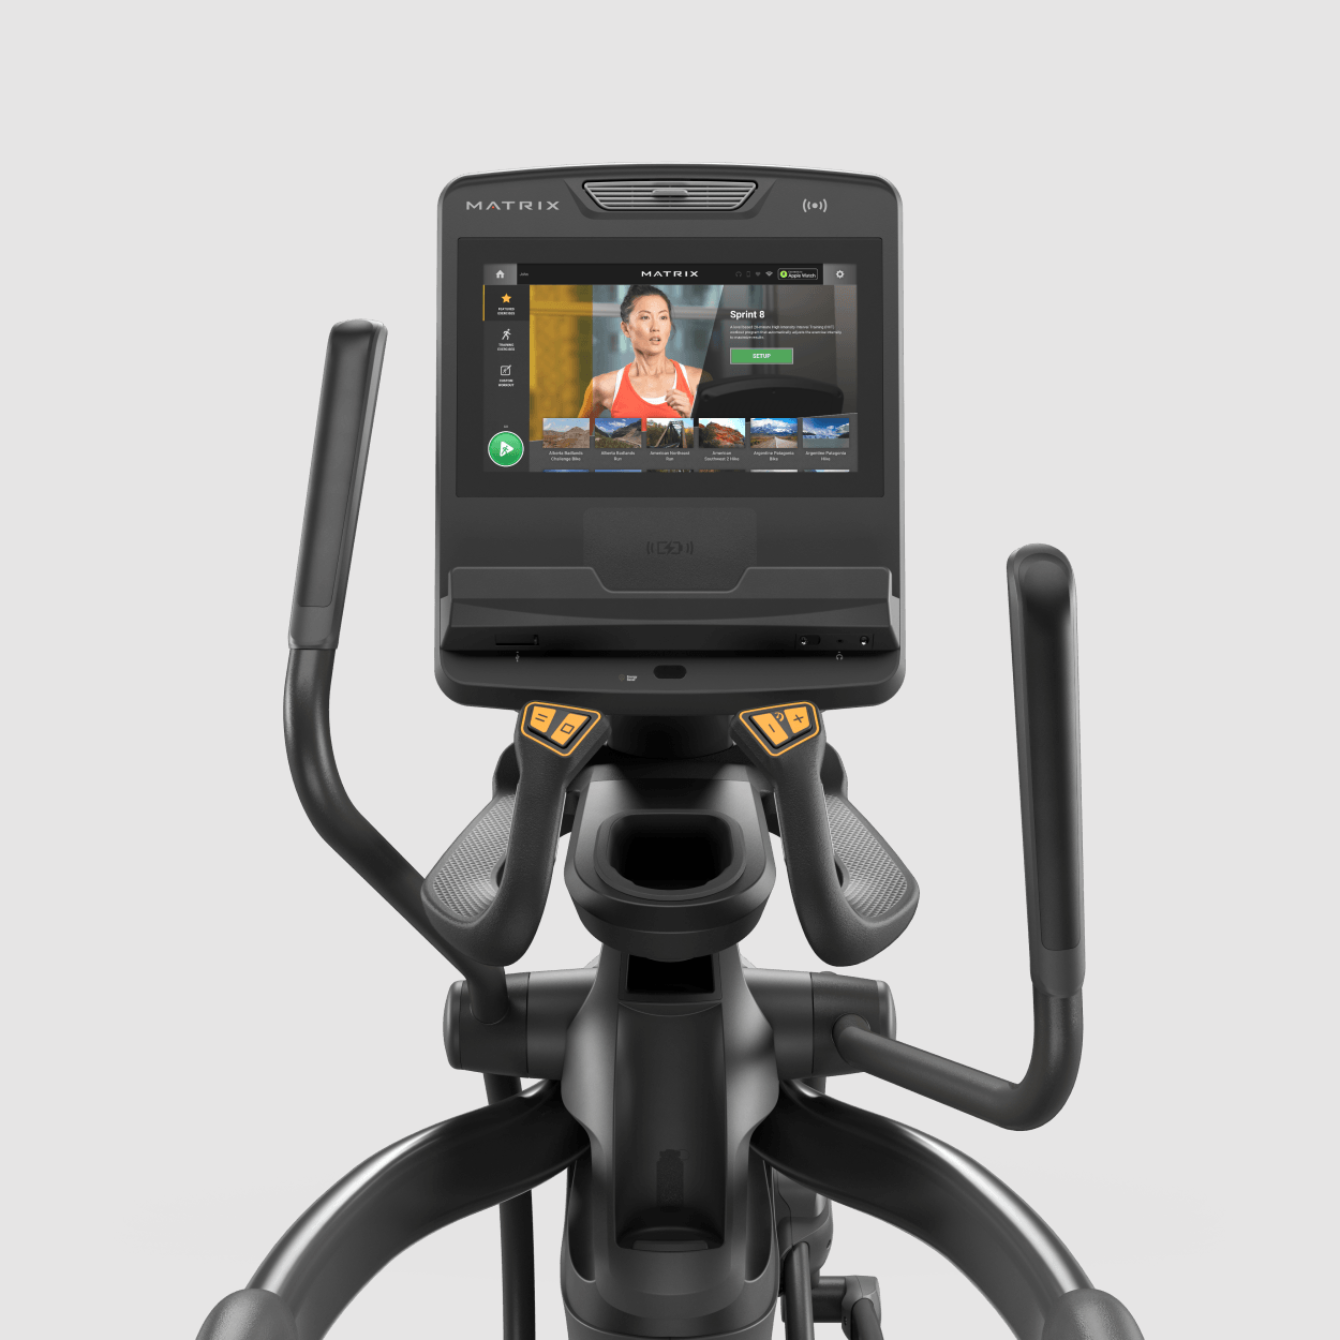 Performance Elliptical with Touch Console